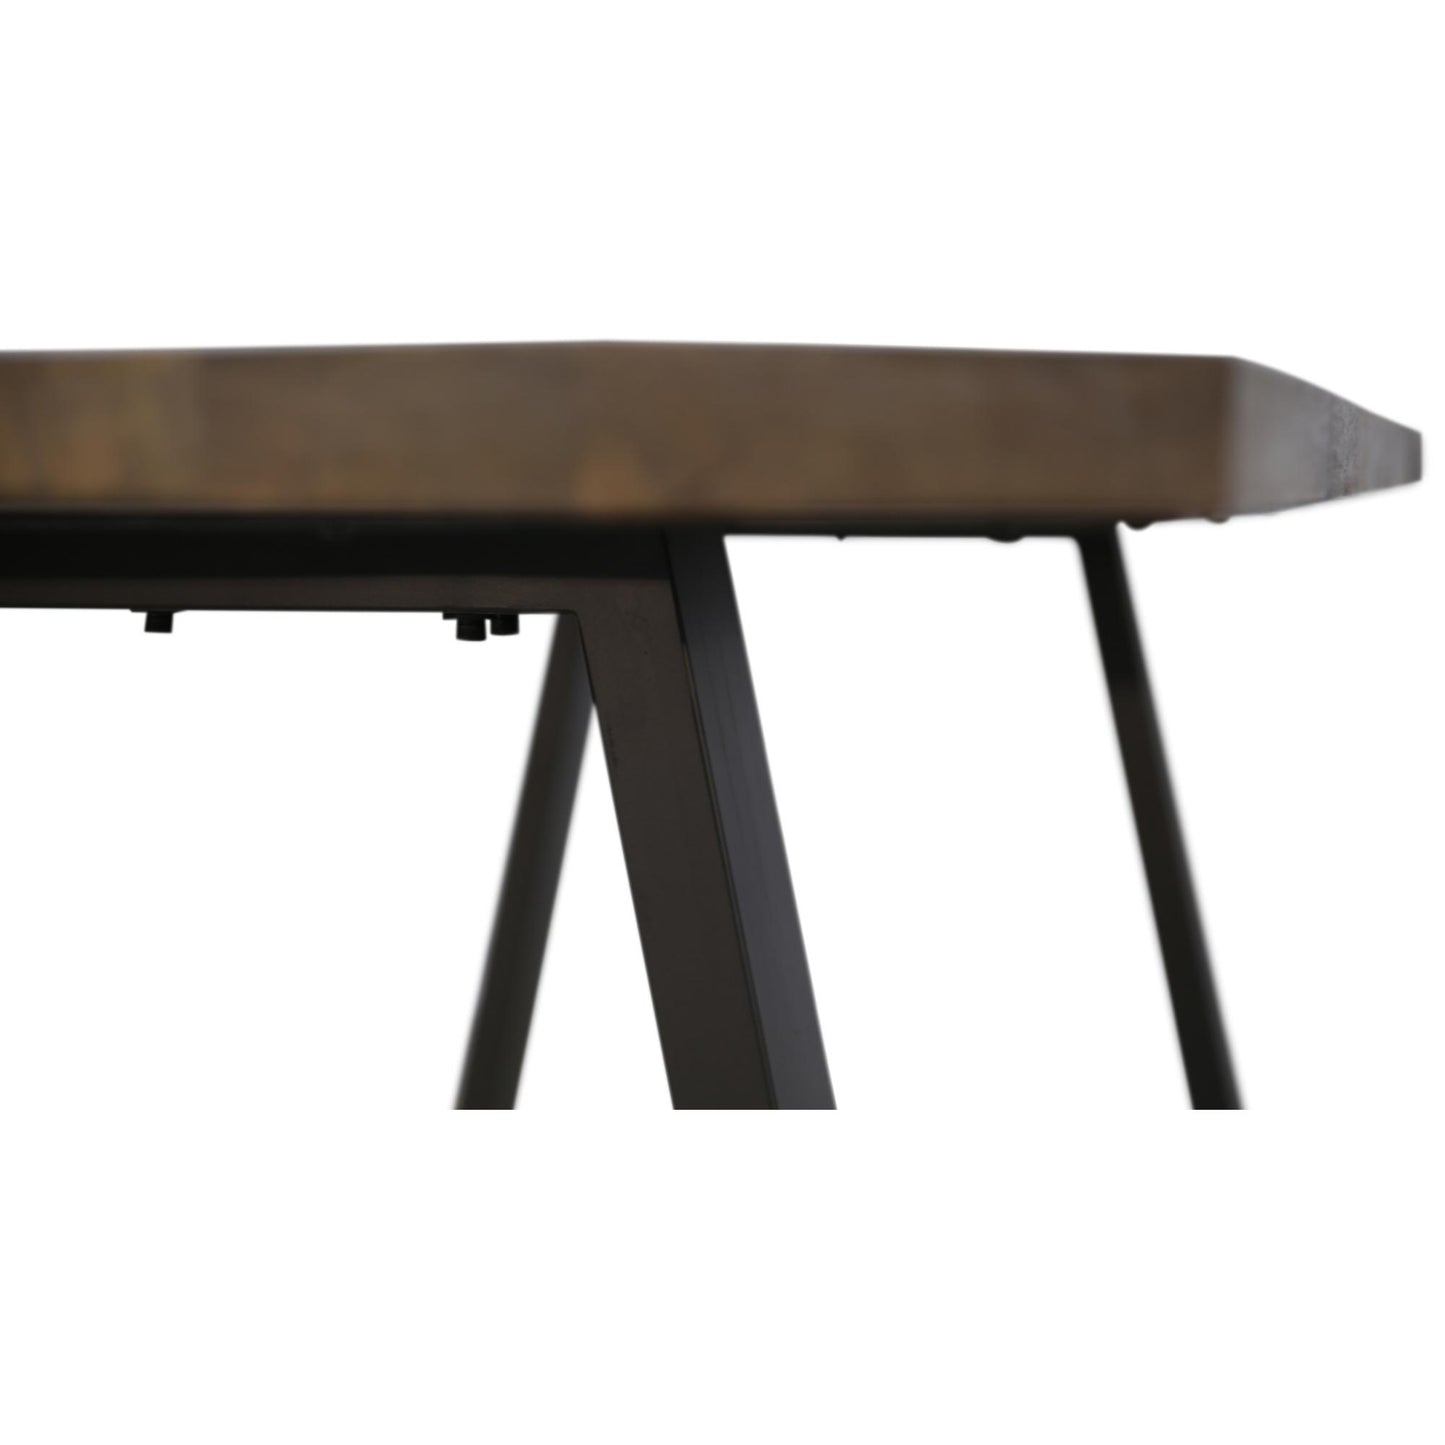 Begonia Live Edge Solid Mango Wood Dining Table 180cm